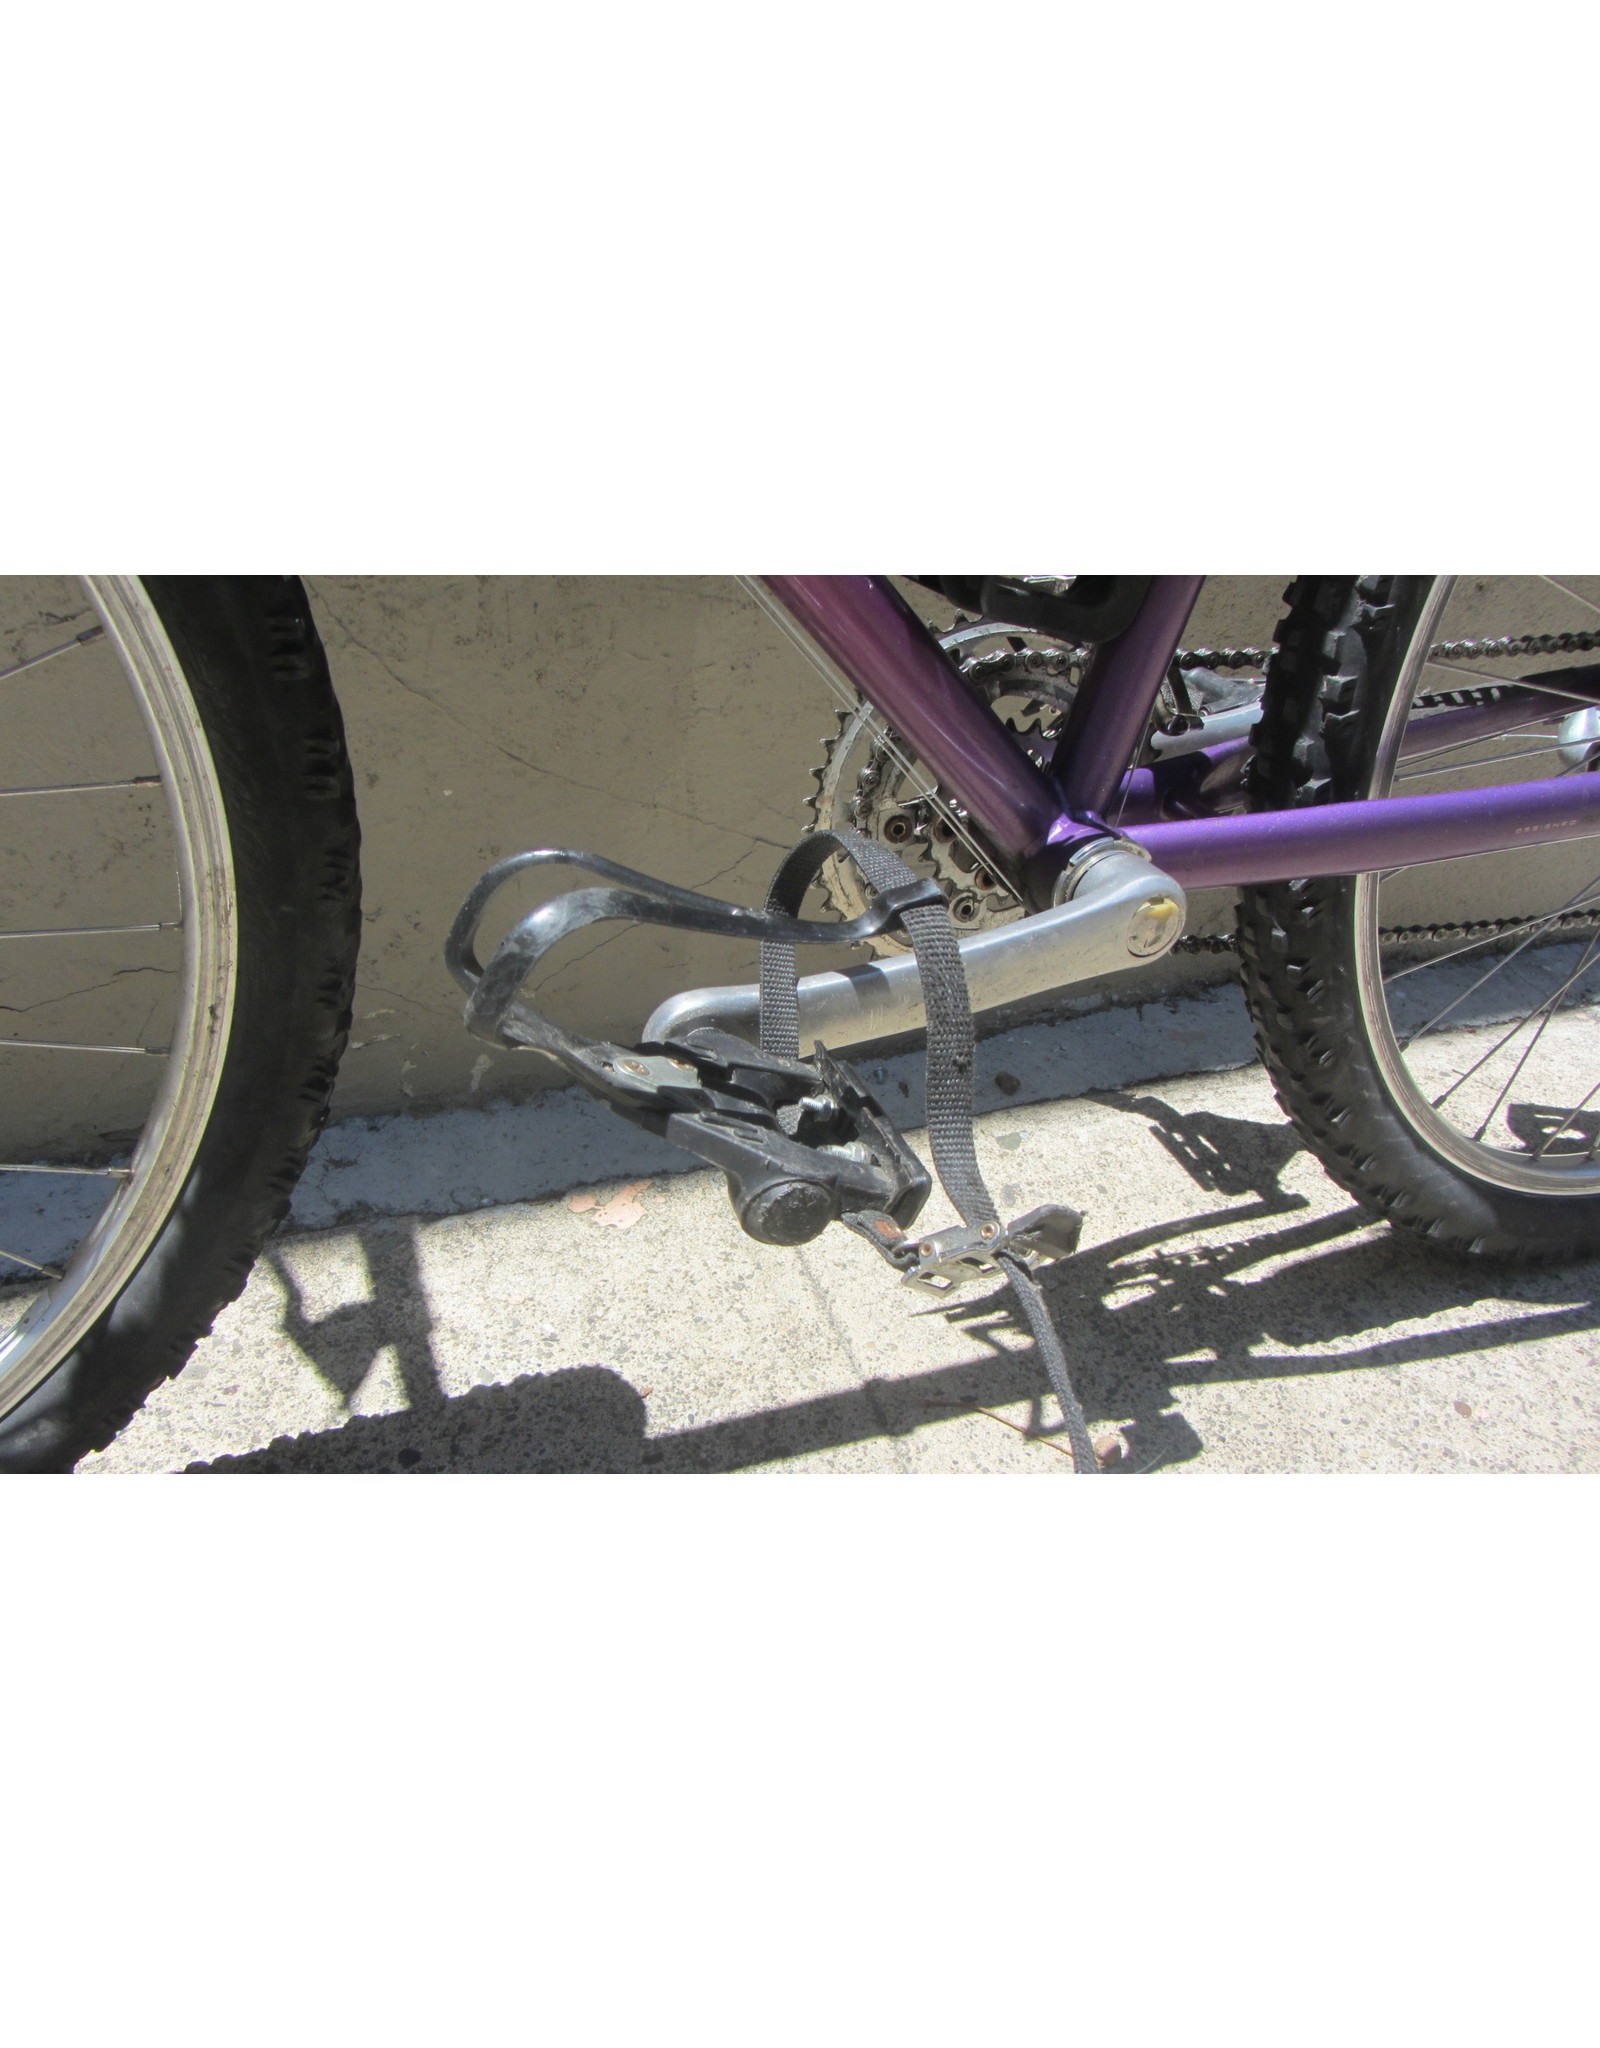 Specialized Specialized Rockhopper Vintage, 17 Inches, Purple